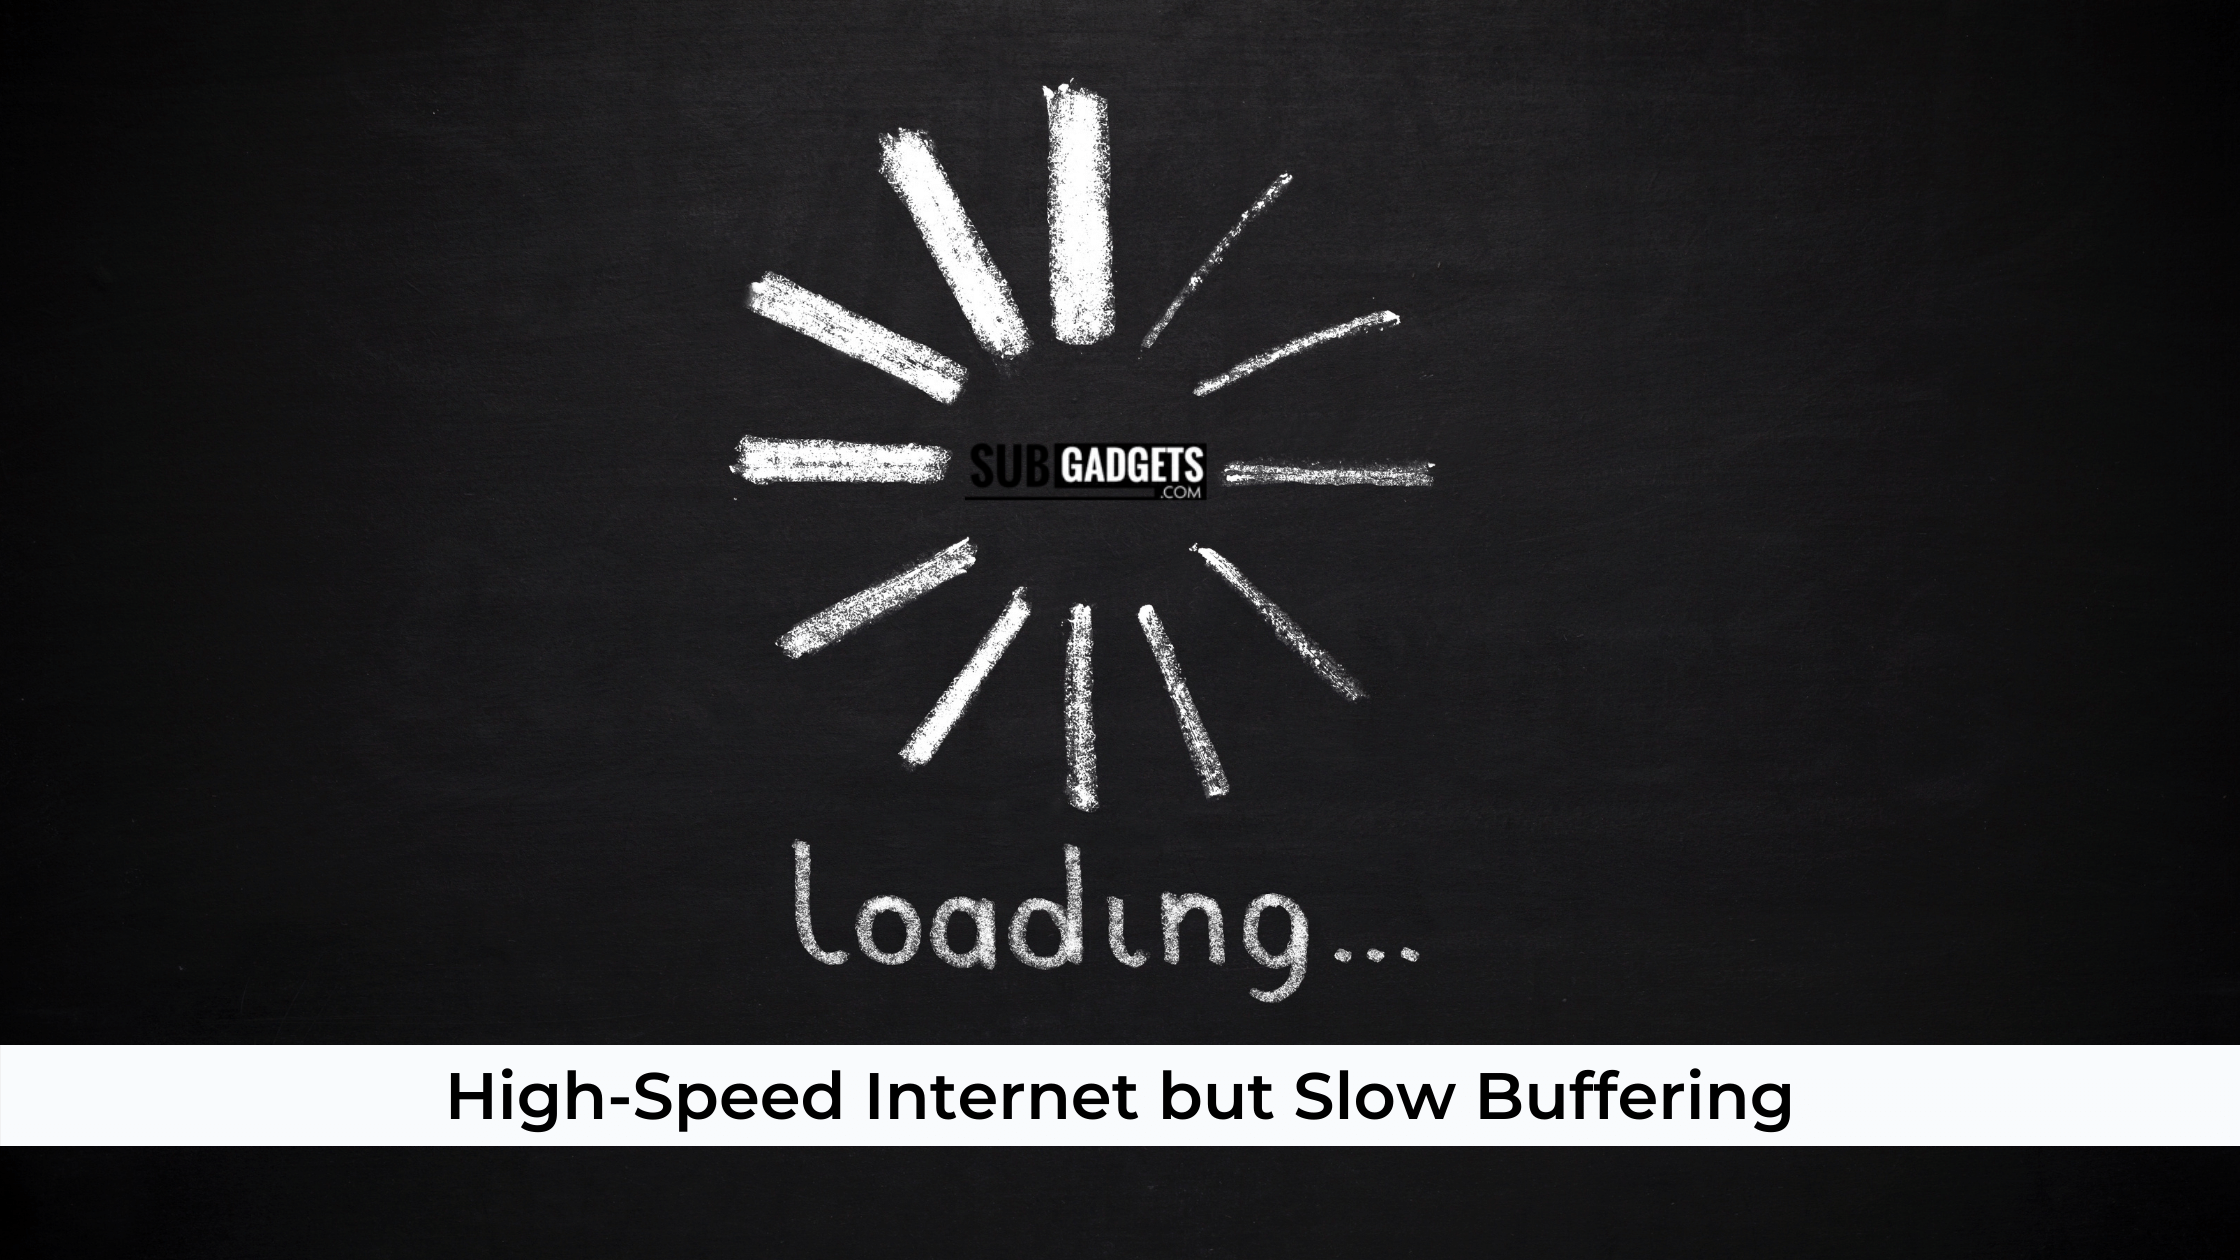 Have High-Speed Internet but Slow Buffering